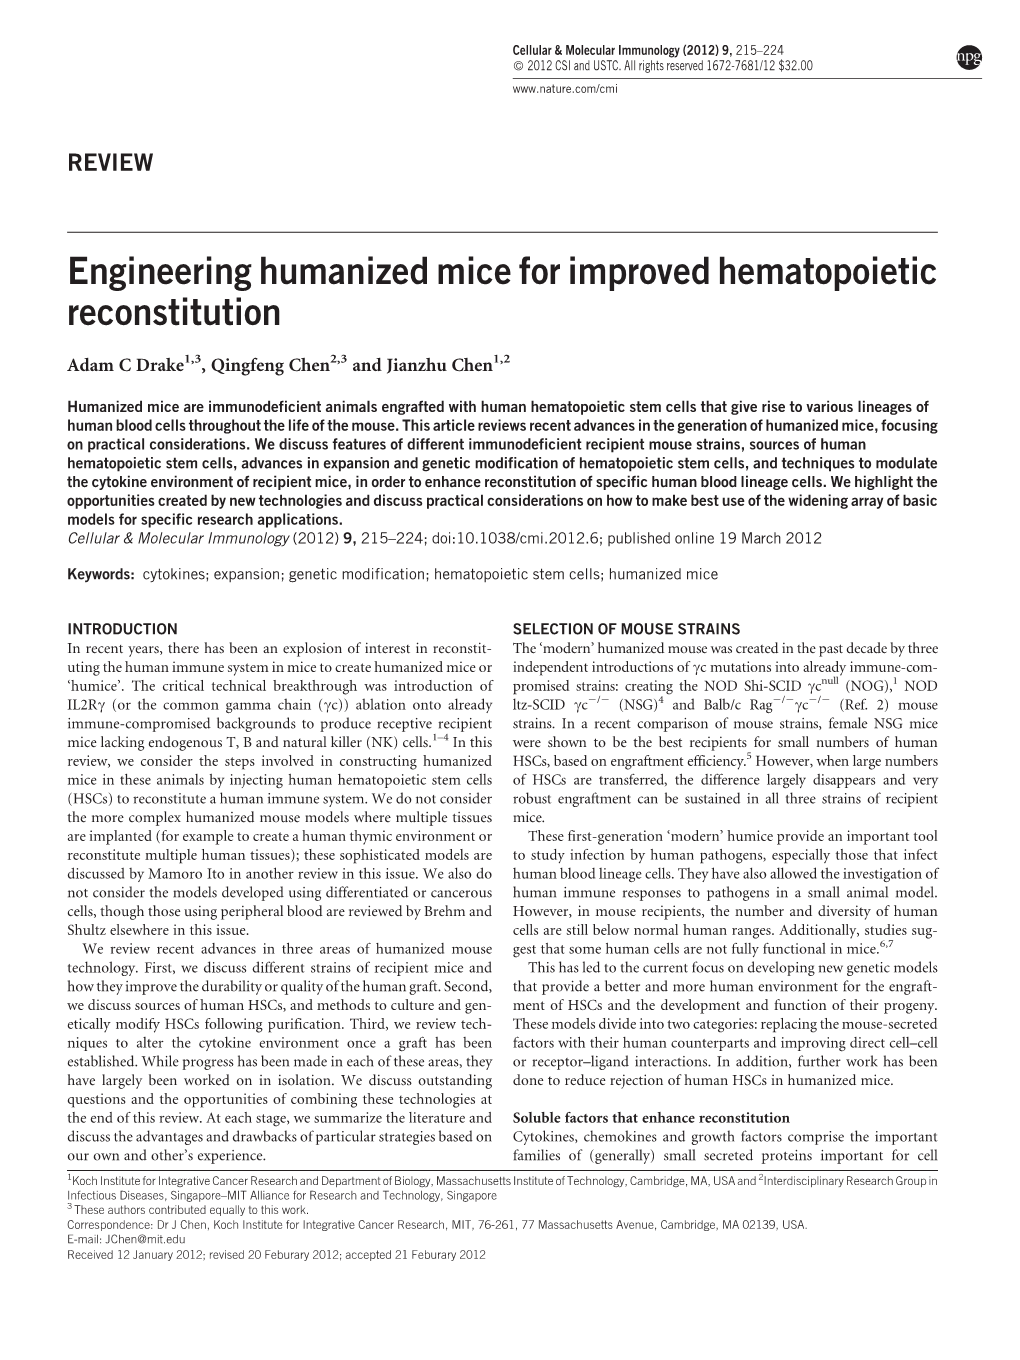 Engineering Humanized Mice for Improved Hematopoietic Reconstitution